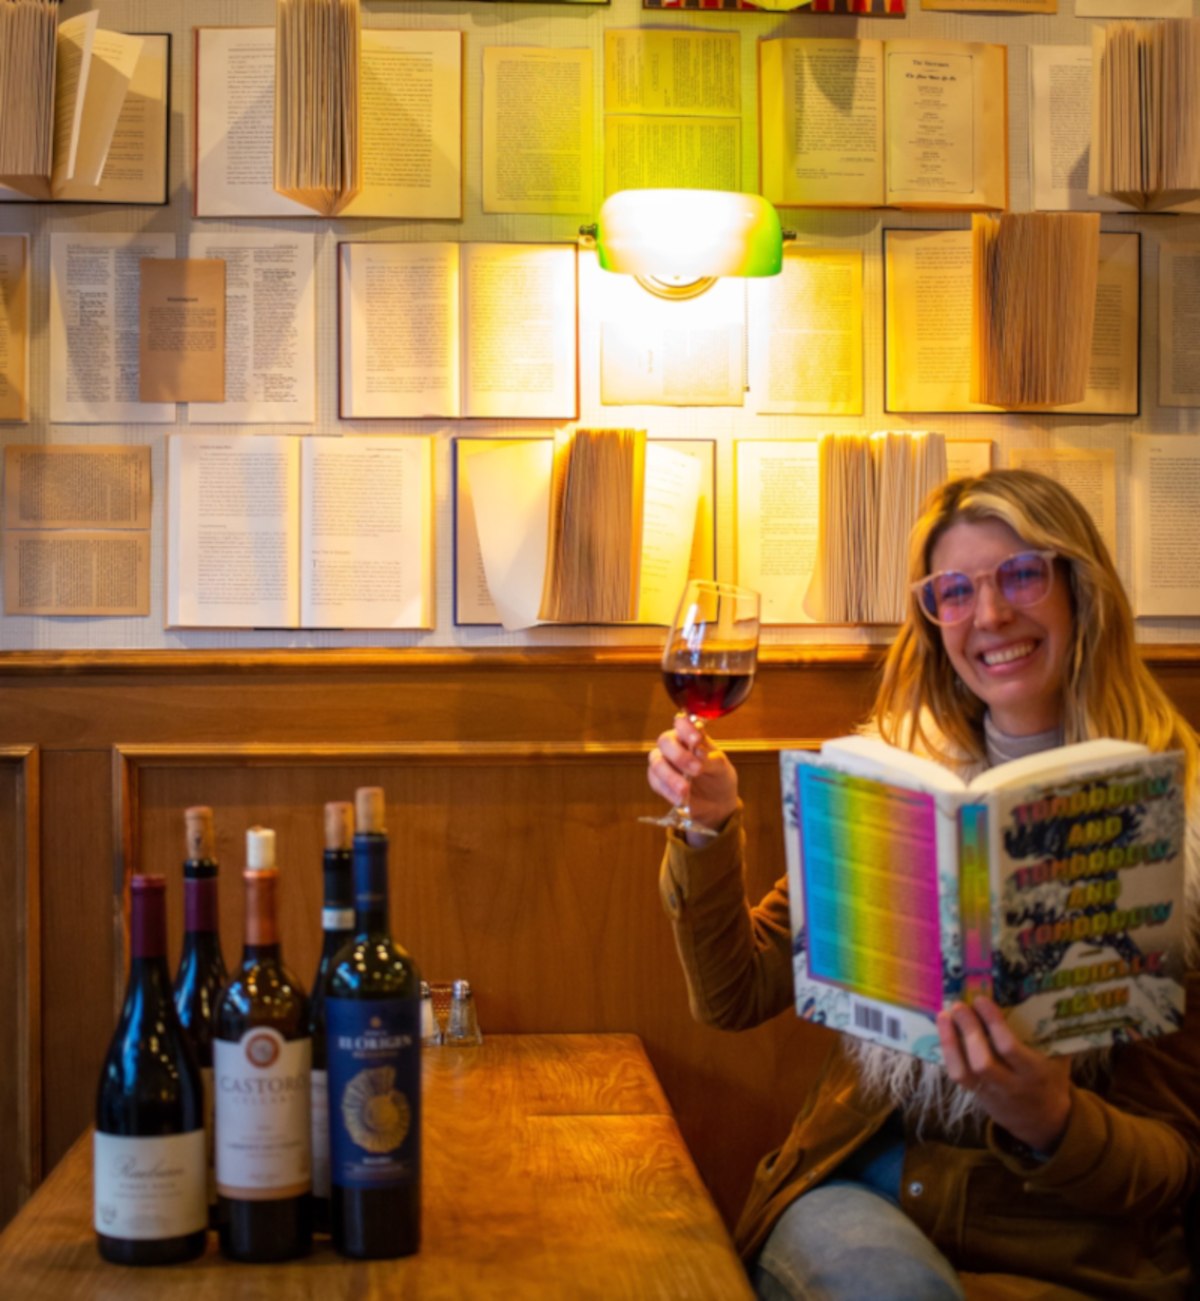 Woman with book and wine